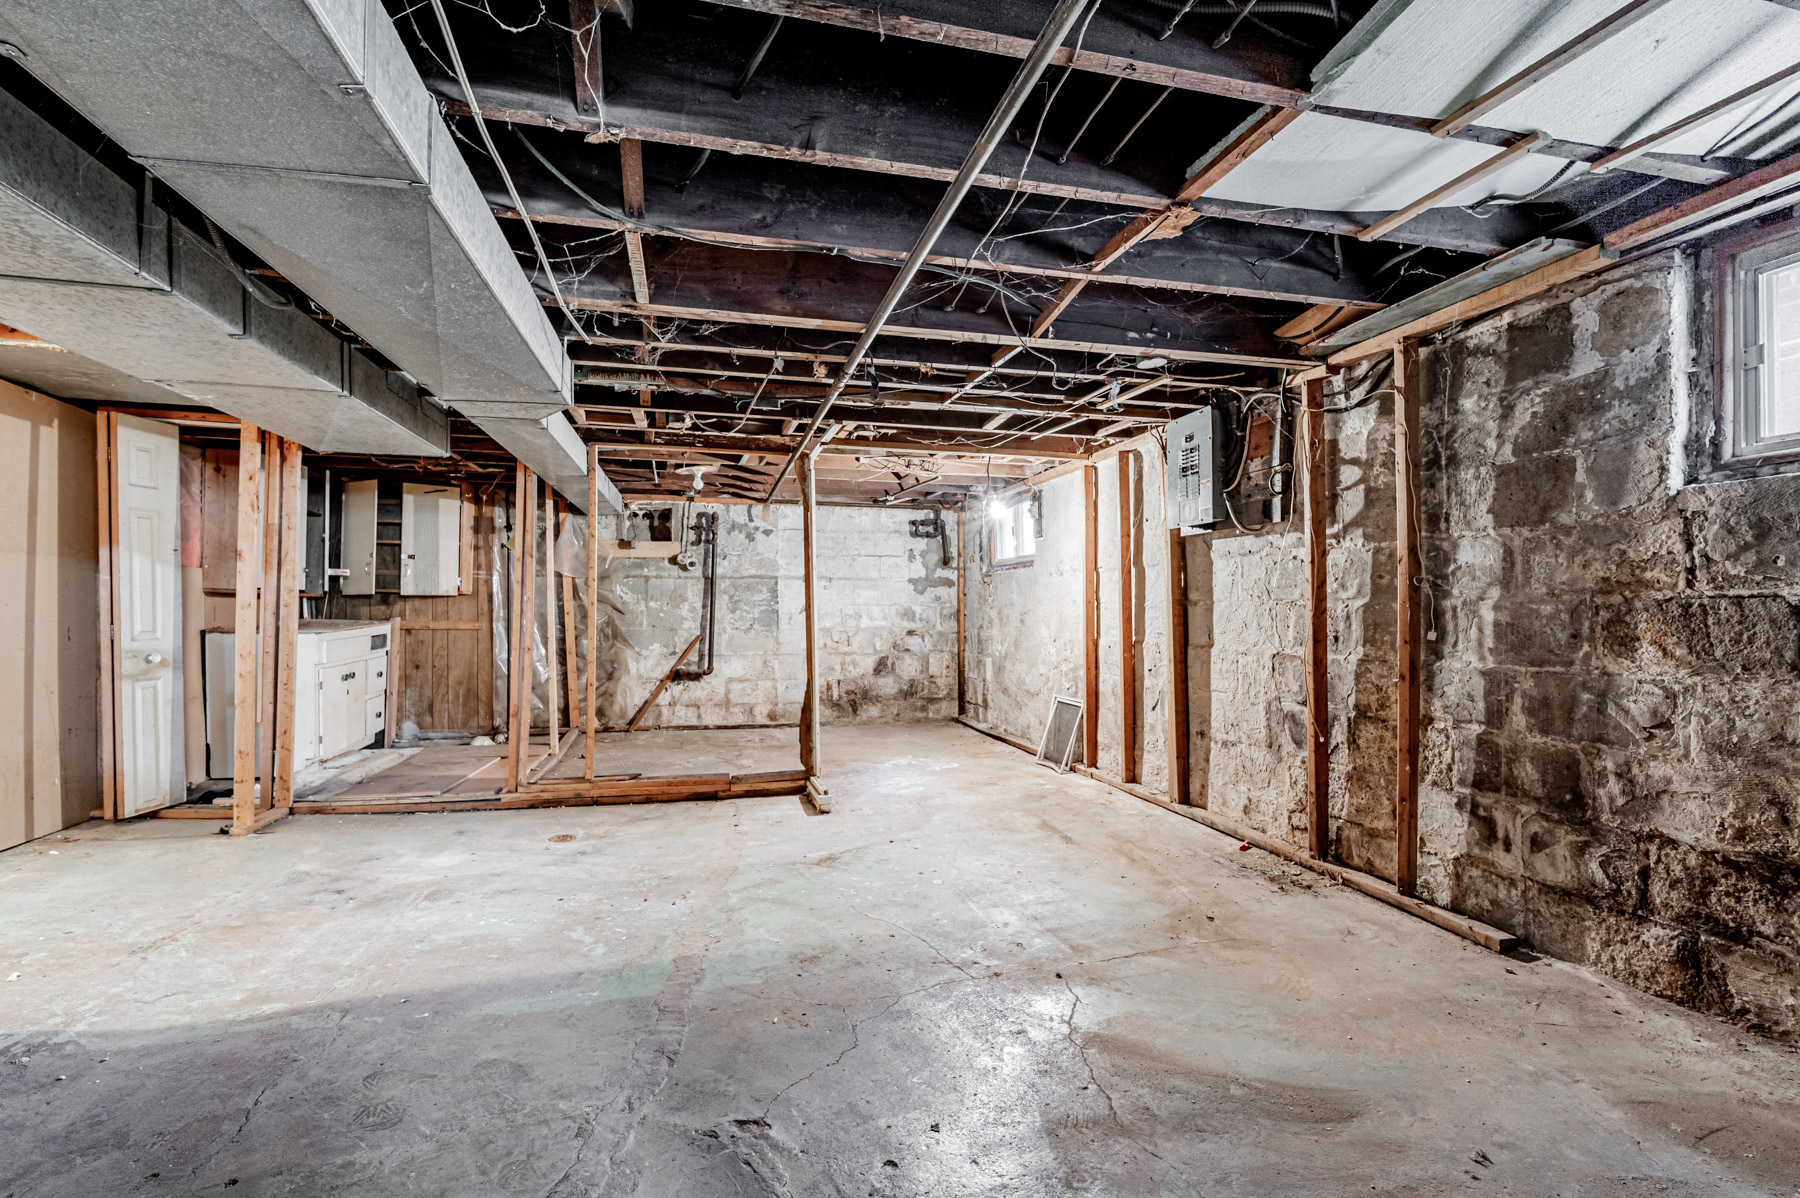 Large unfinished basement with bare walls, floors, exposed ceiling and woodwork.